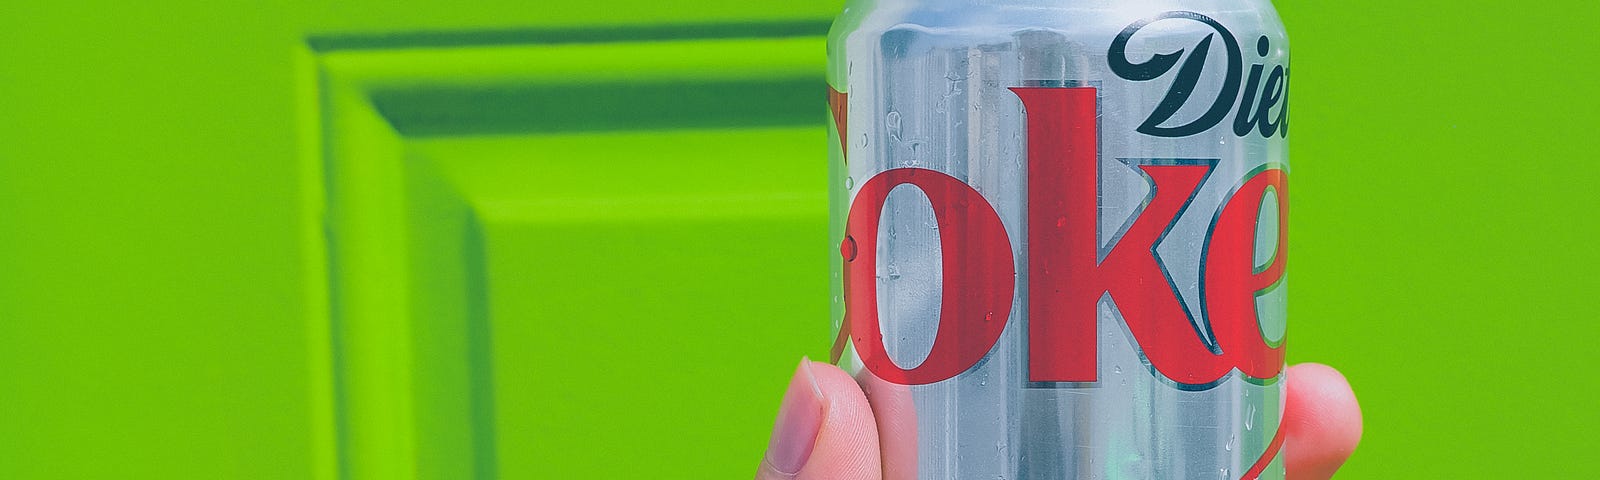 A hand holding a can of Diet Coke in front of a bright green door